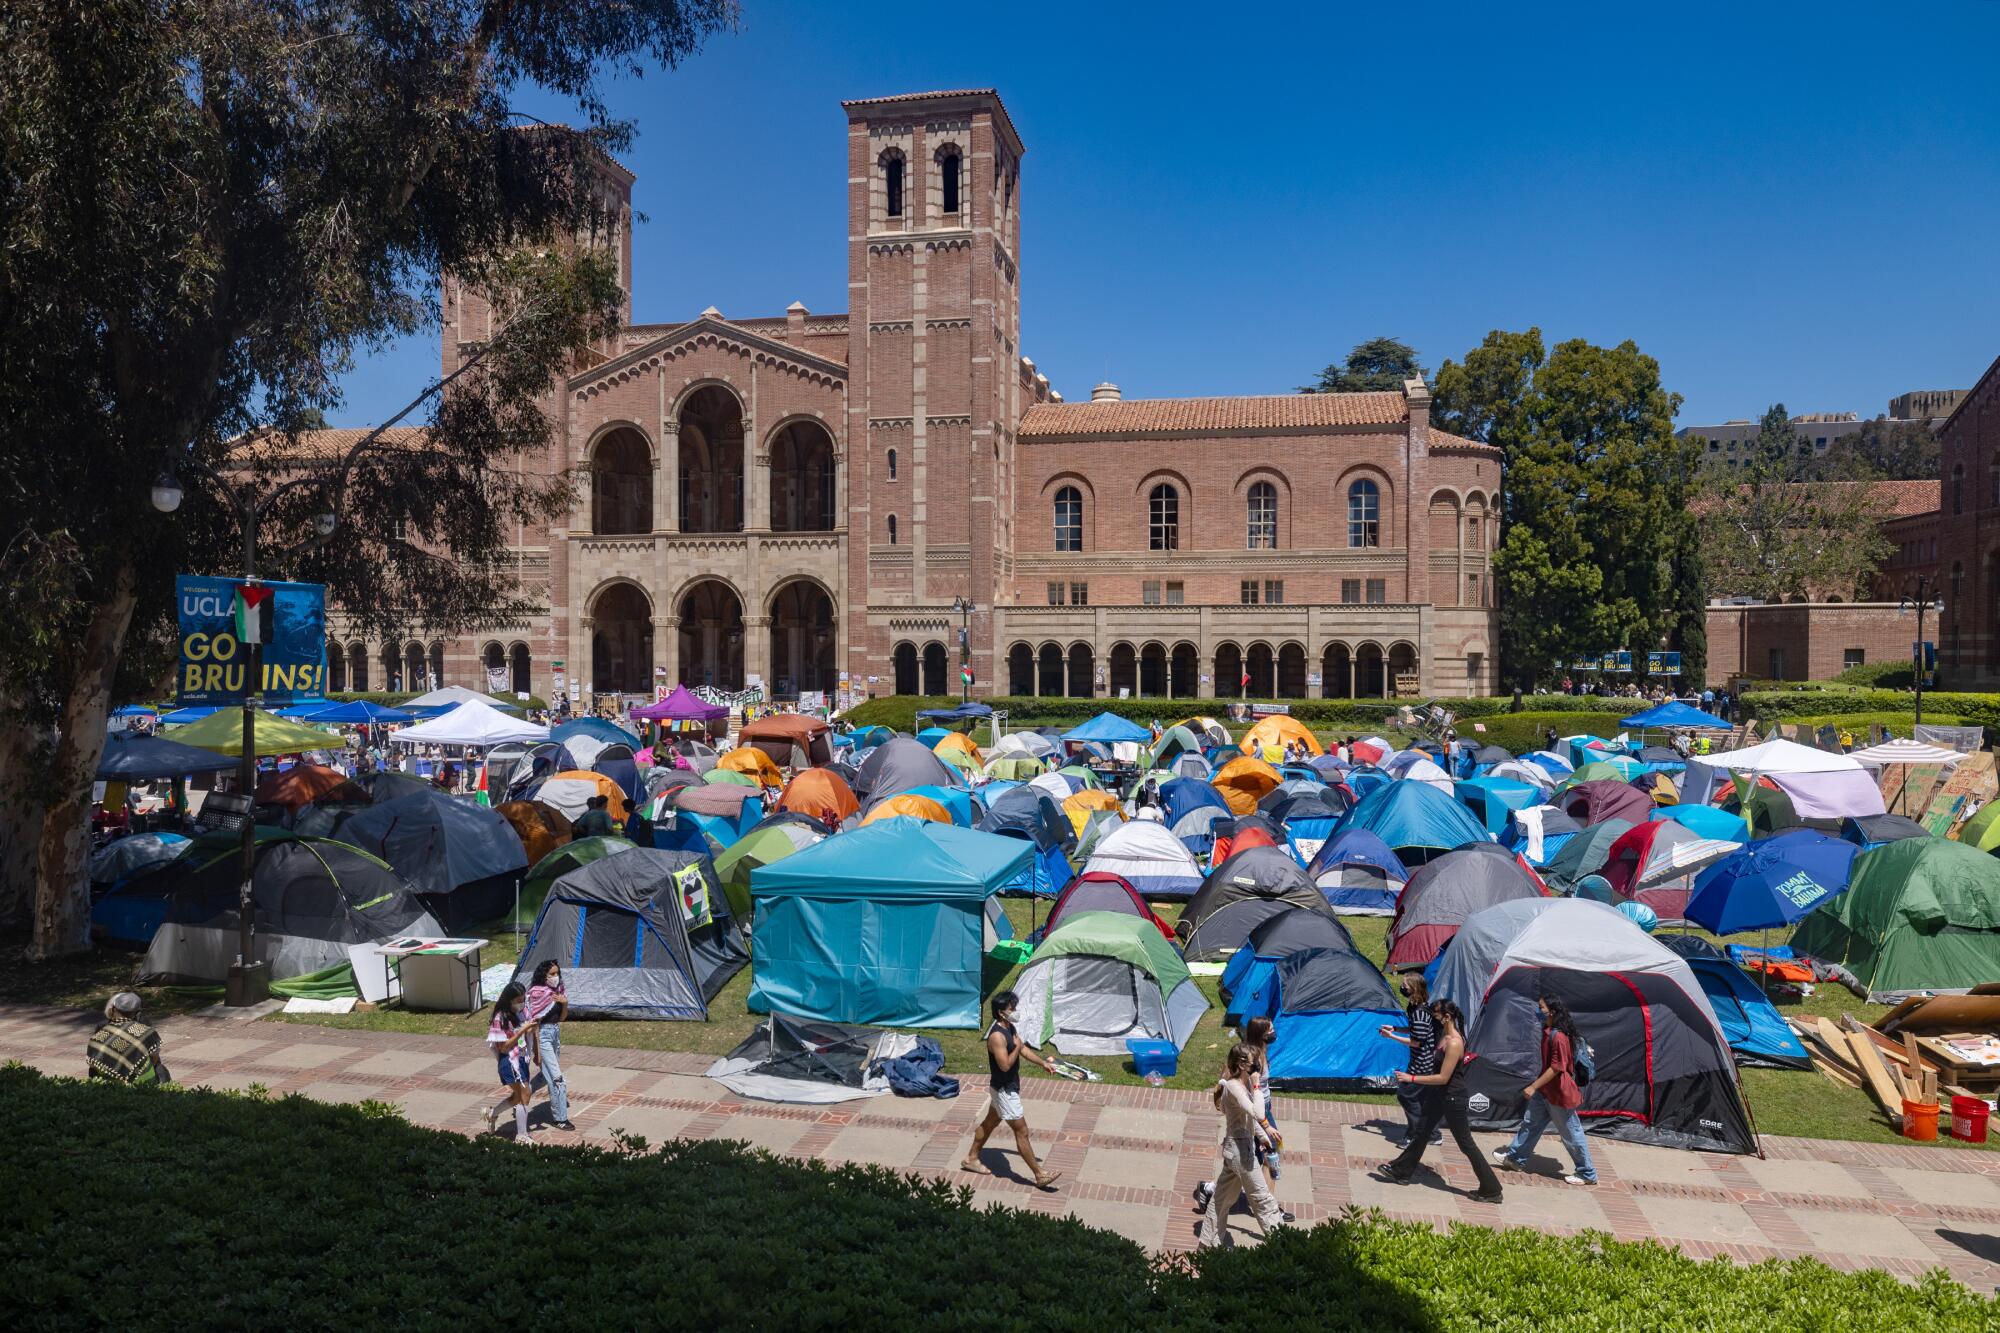 An encampment of tents on a lawn outside UCLA's Dickson Plaza